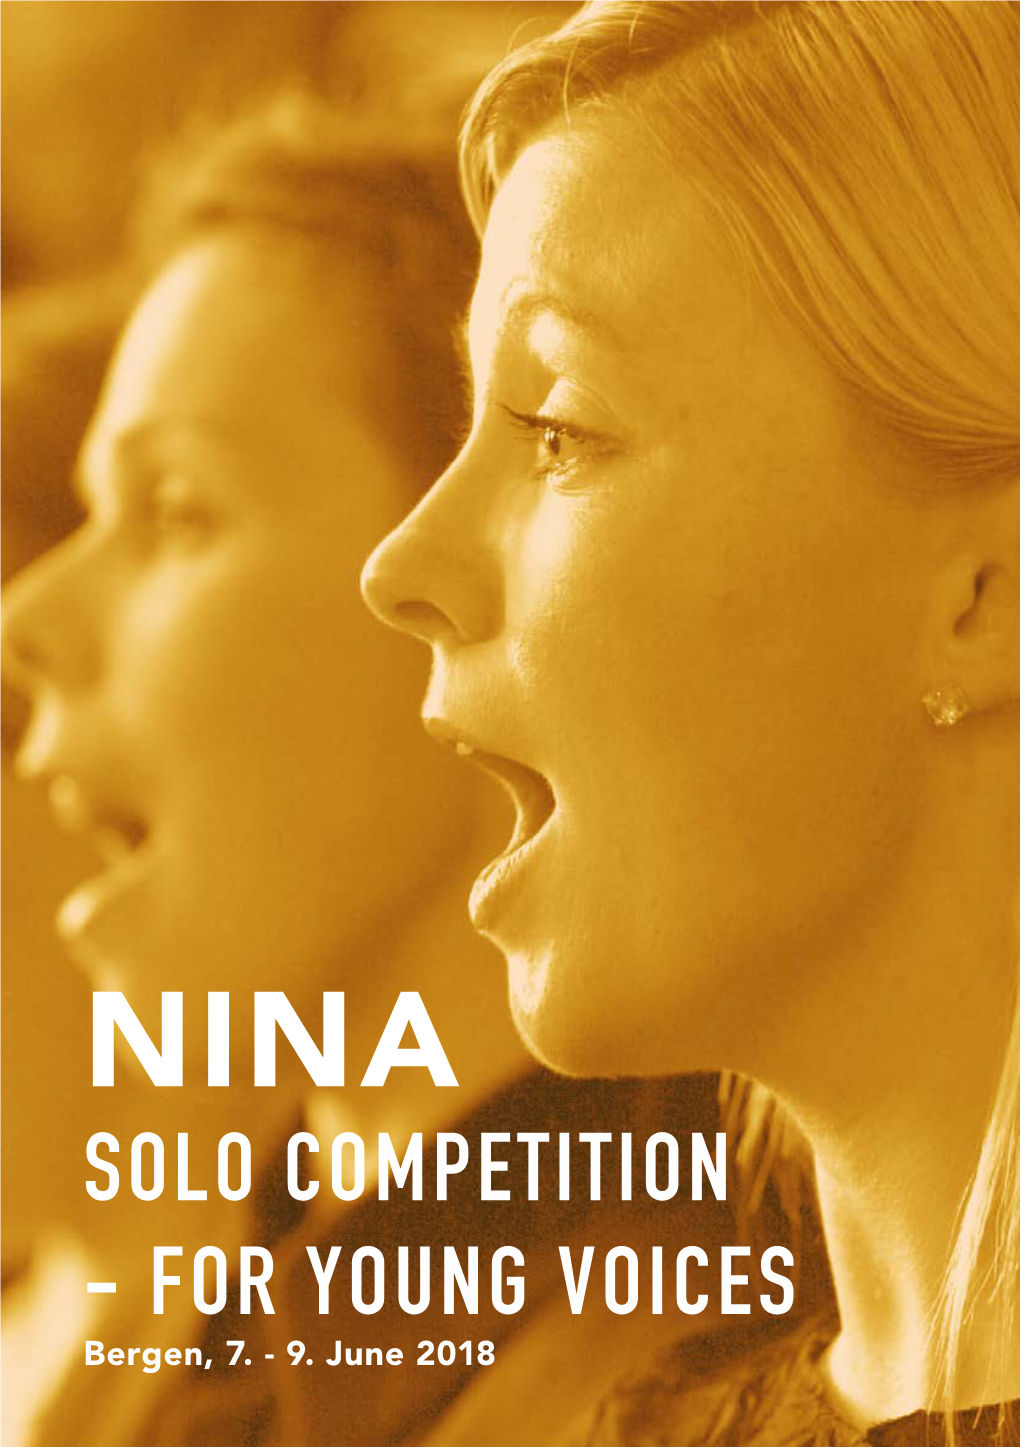 SOLO COMPETITION - for YOUNG VOICES Bergen, 7